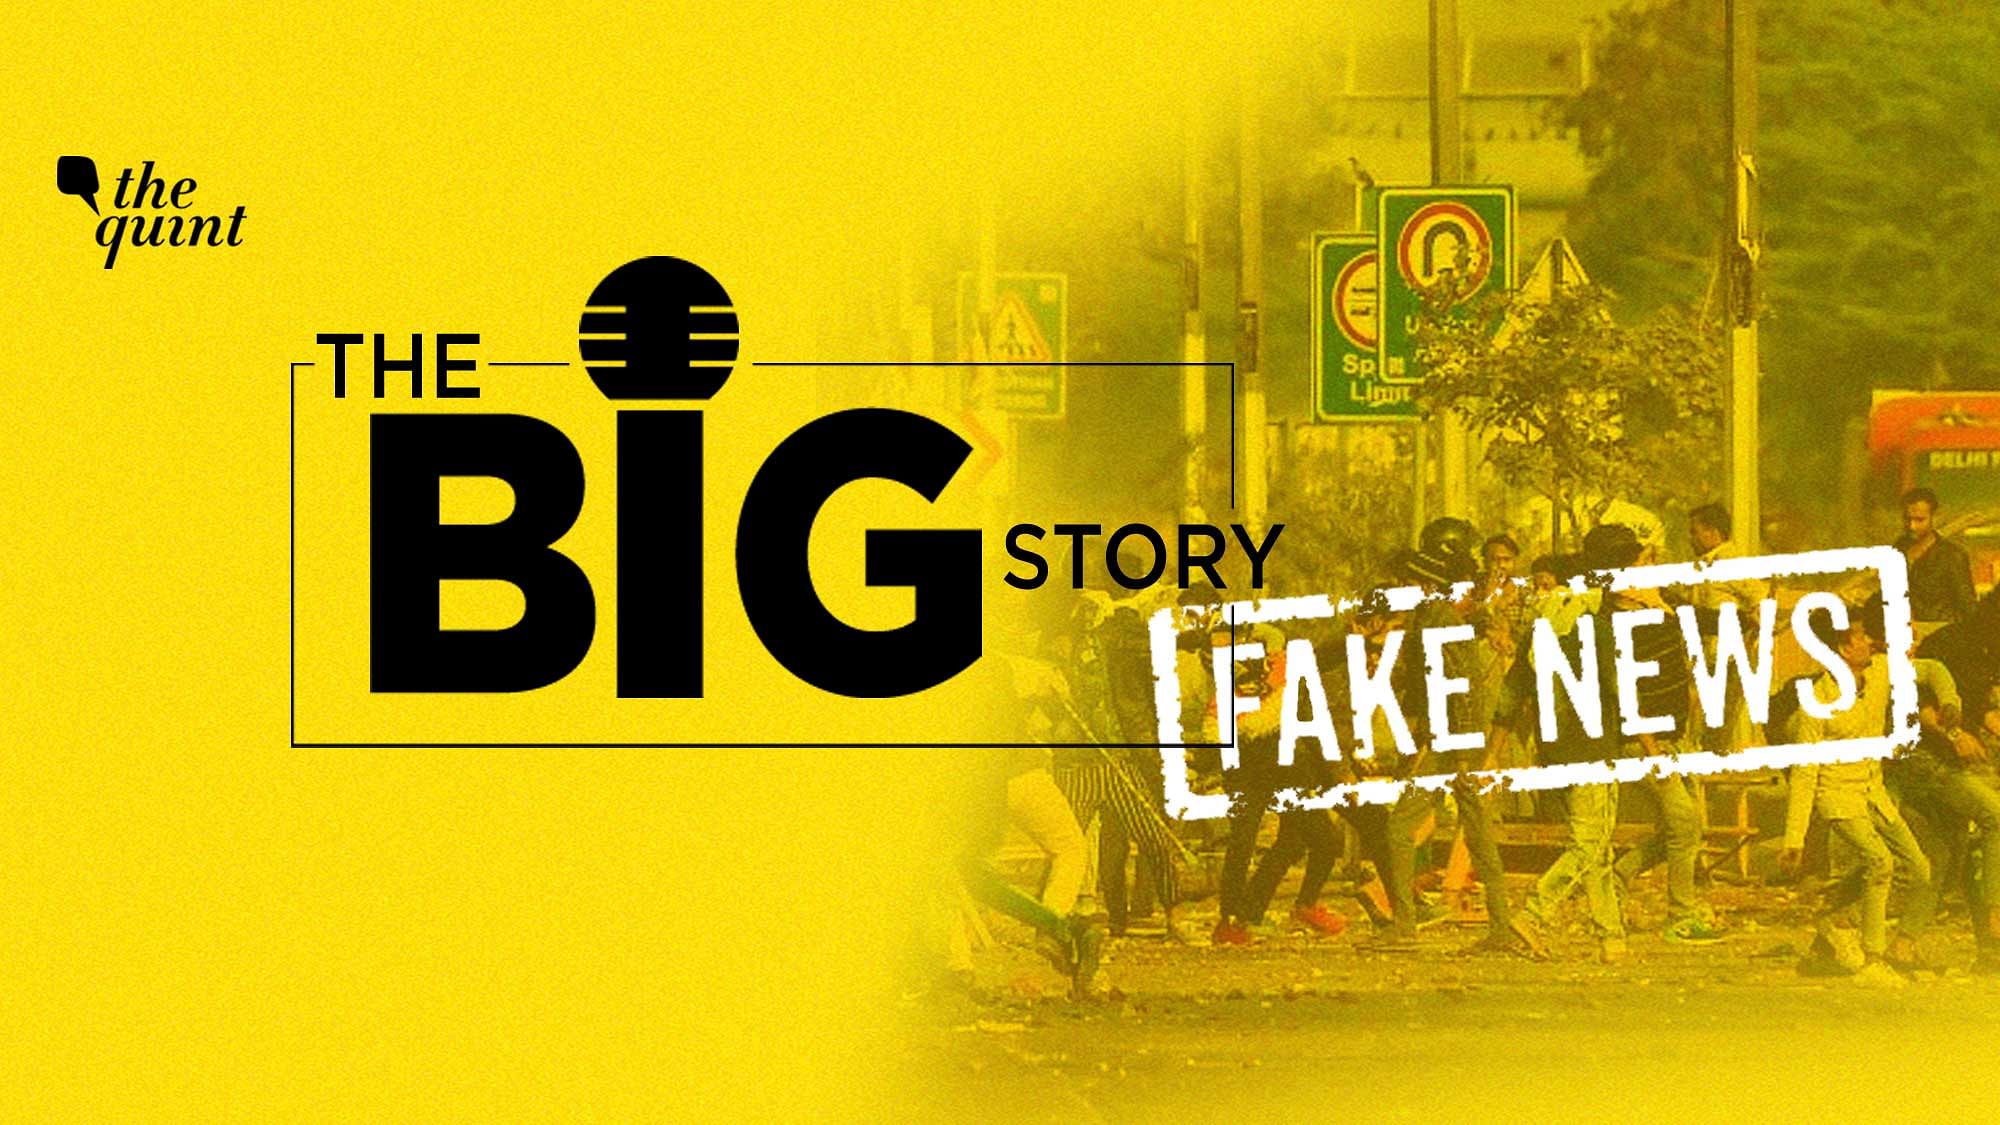 Today, we’re joined by Kritika Goel, the head of The Quint’s fact-checking initiative, WebQoof, as we debunk the fake news that was circulated during the Delhi violence.